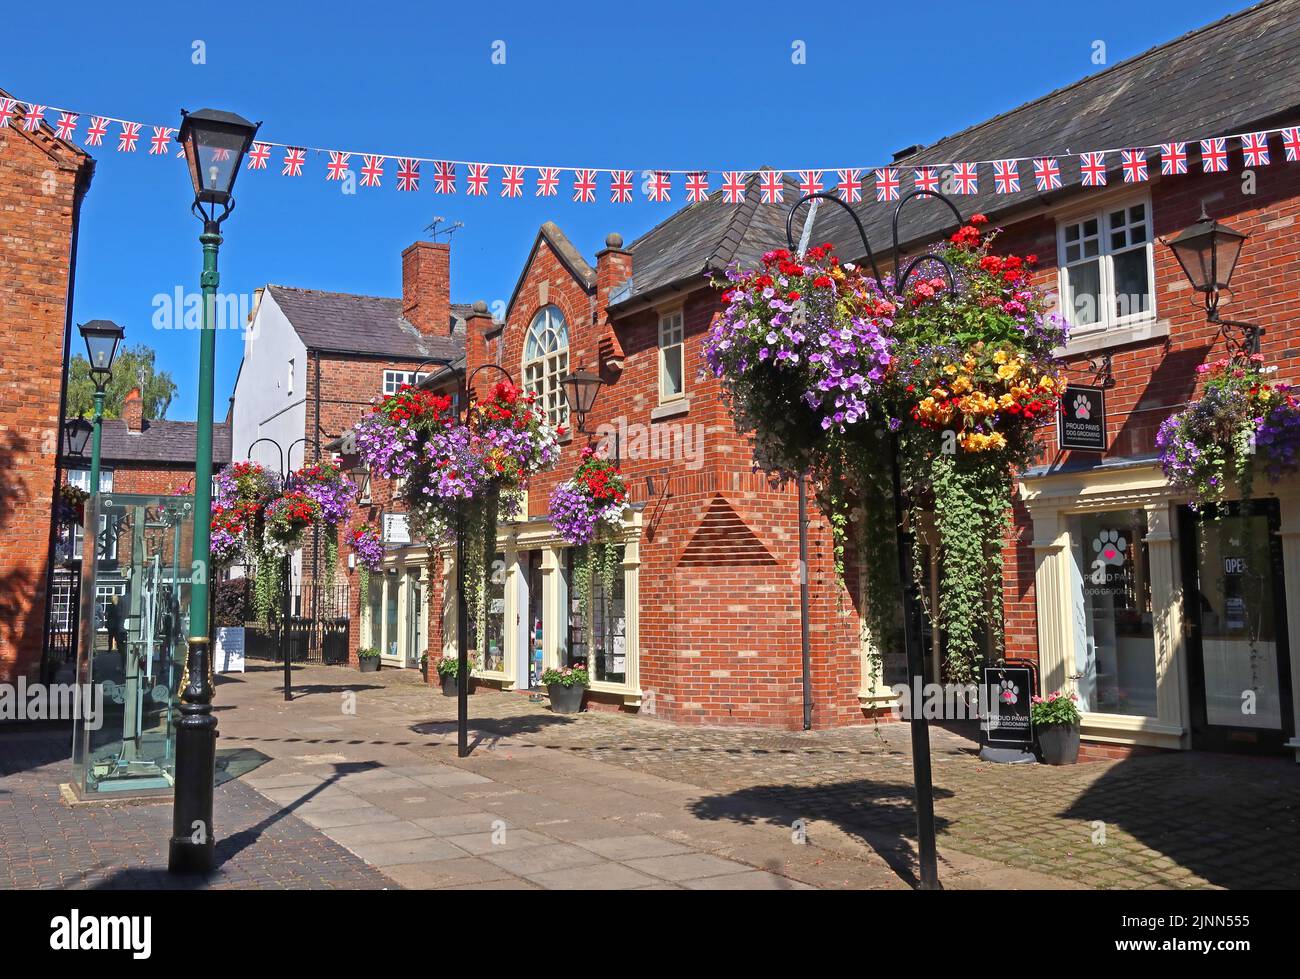 The Cocoa Yard, & Cocoa House, Pillory Street, Nantwich, Cheshire, ENGLAND, GROSSBRITANNIEN, CW5 5BL Stockfoto